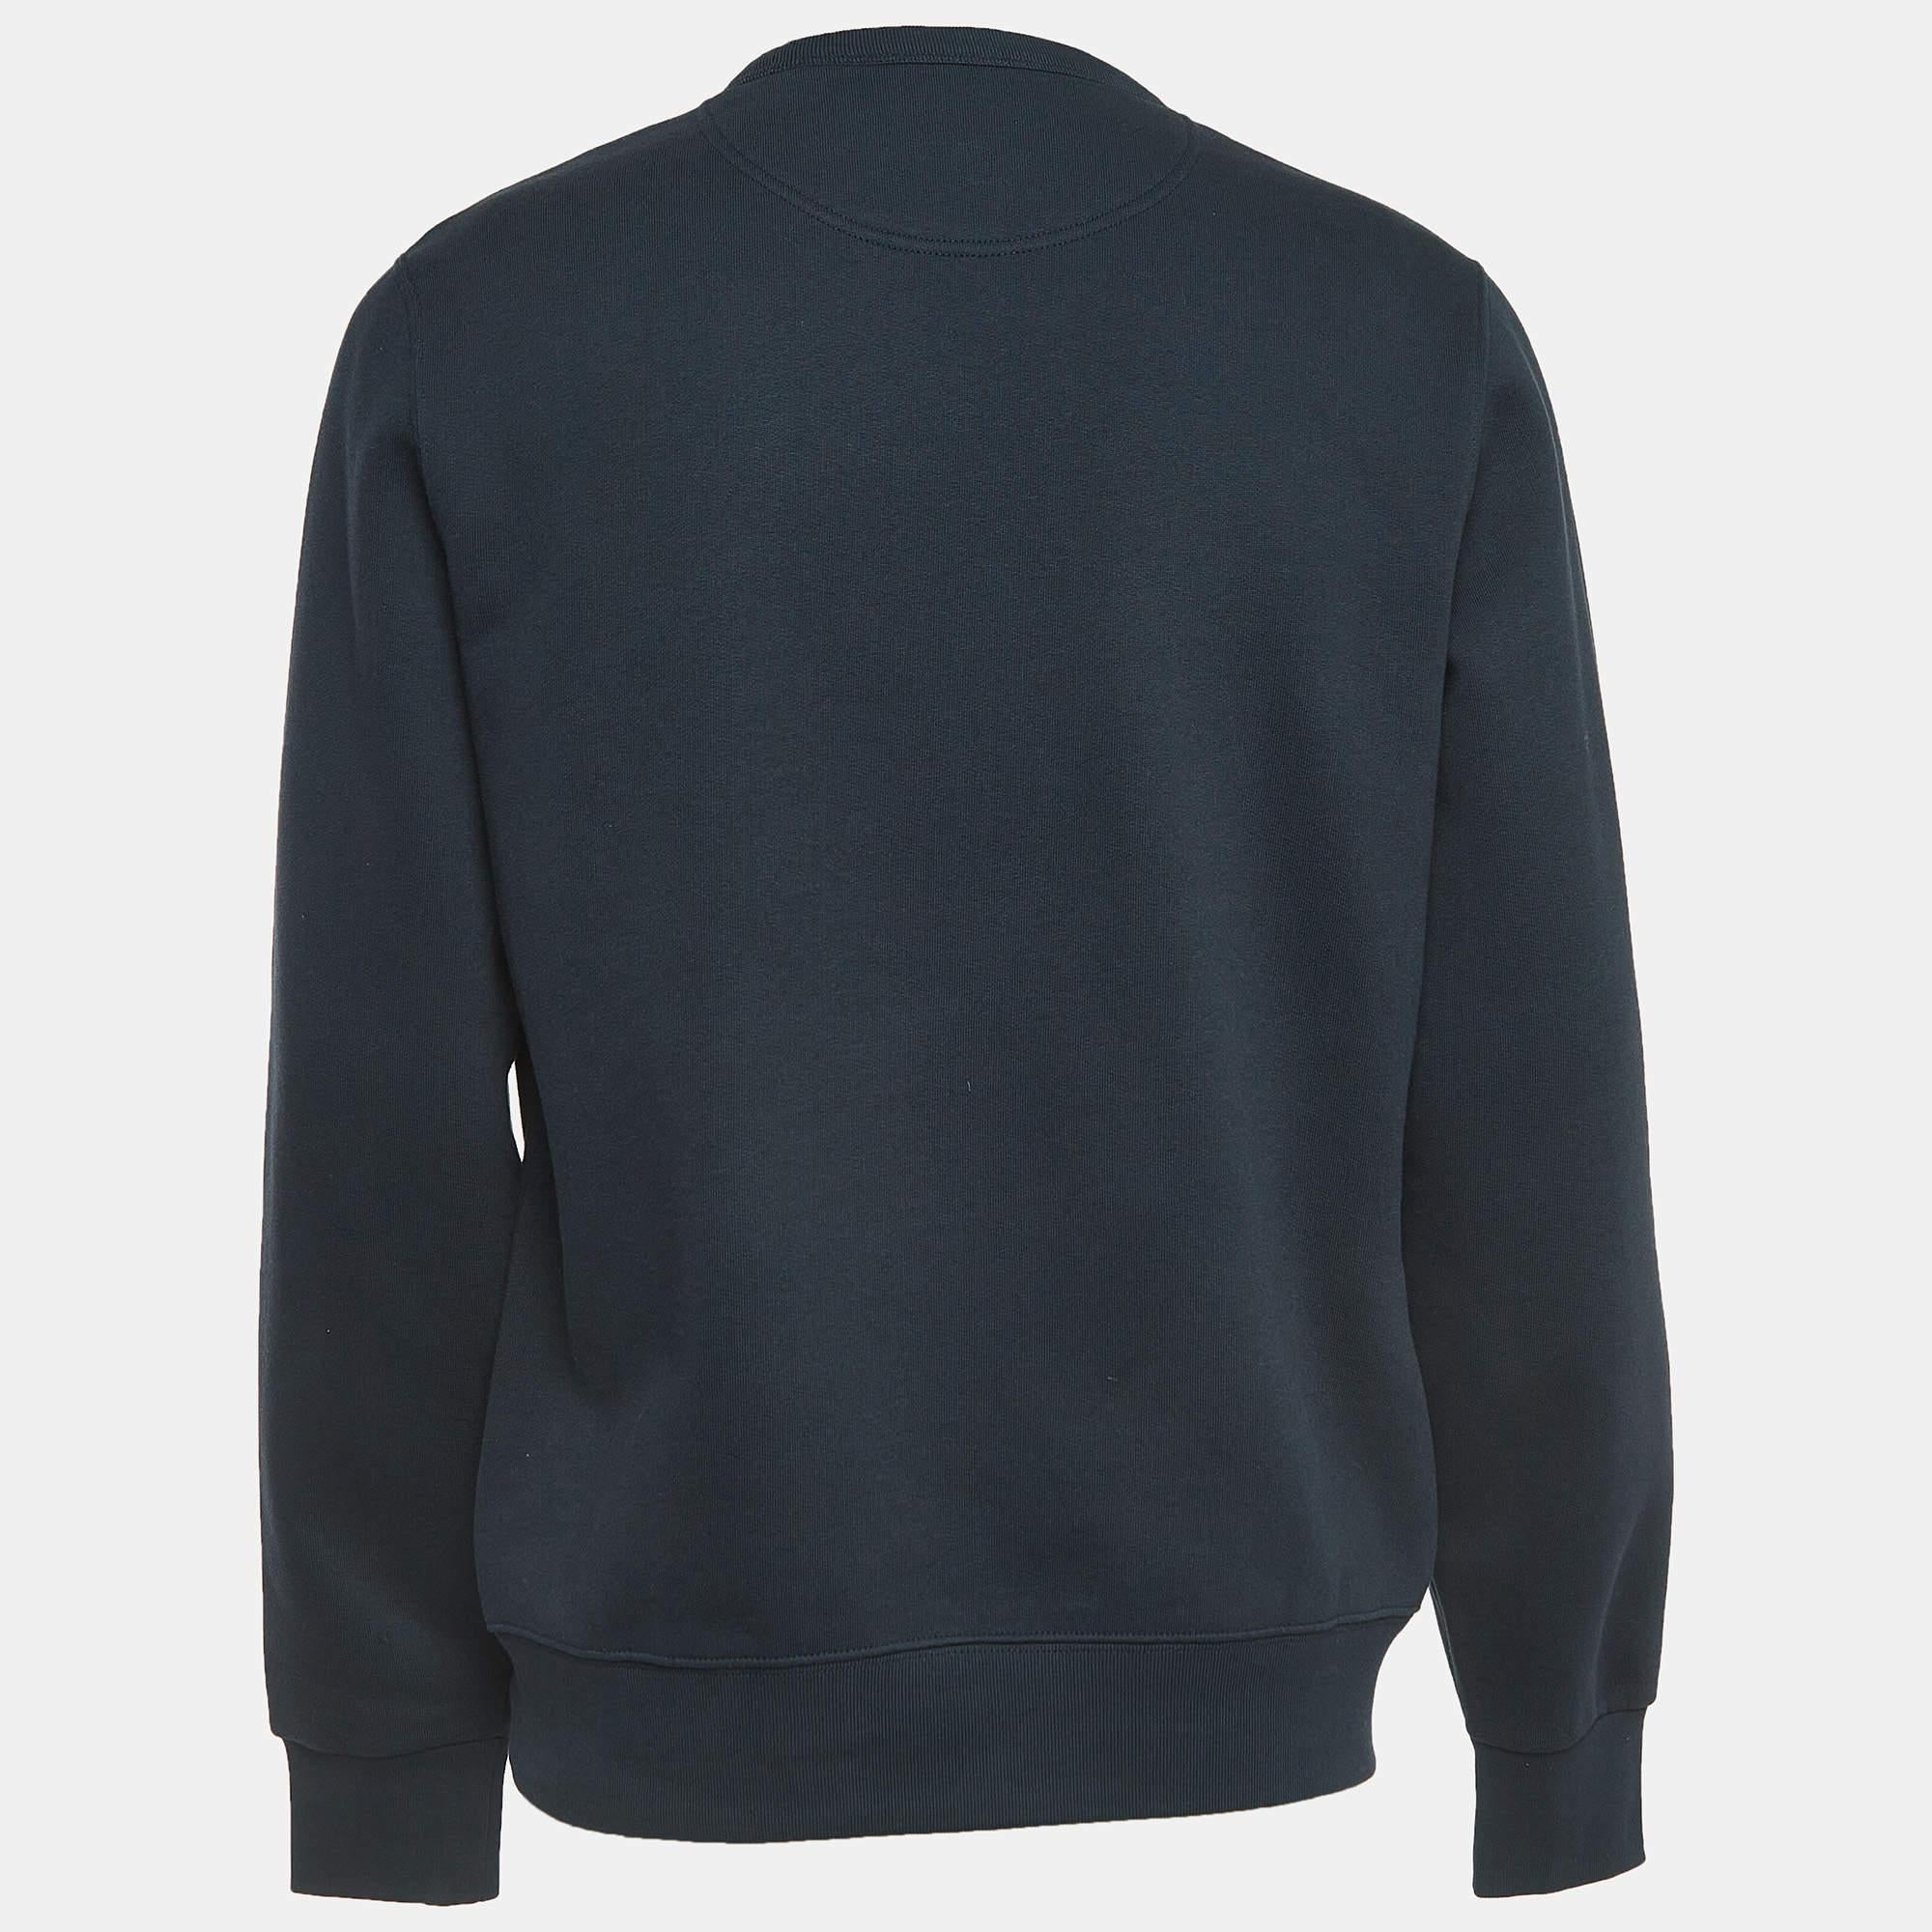 Whether you want to go out on casual outings with friends or just want to lounge around, this sweatshirt is a versatile piece and can be styled in many ways. It has been made using fine fabric.

